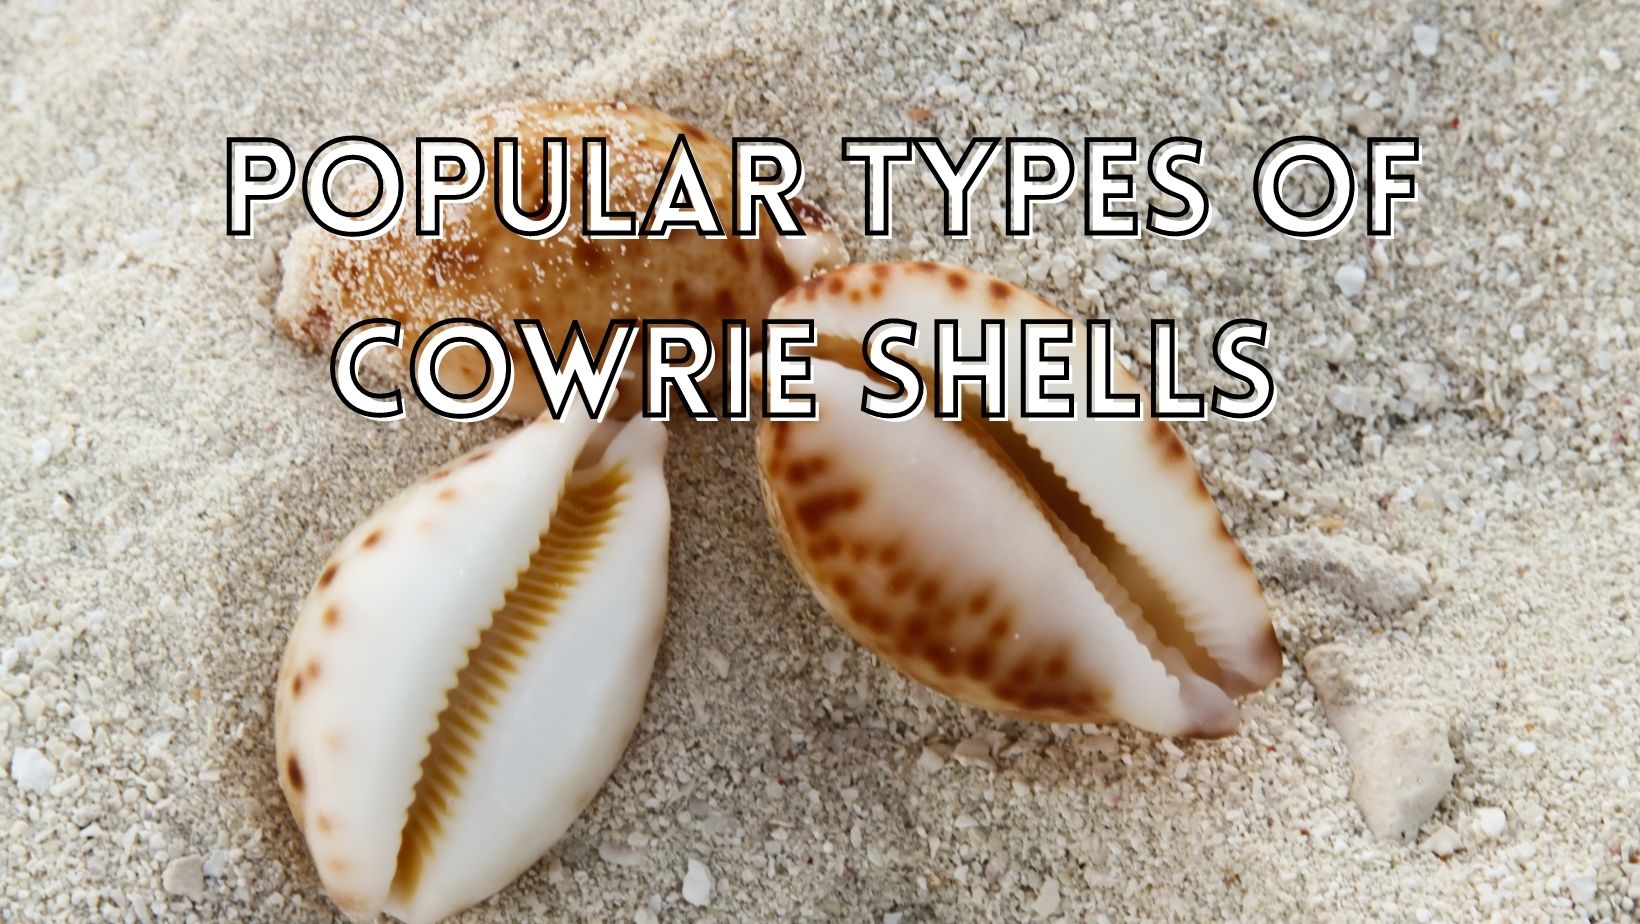 Popular types of cowrie shells